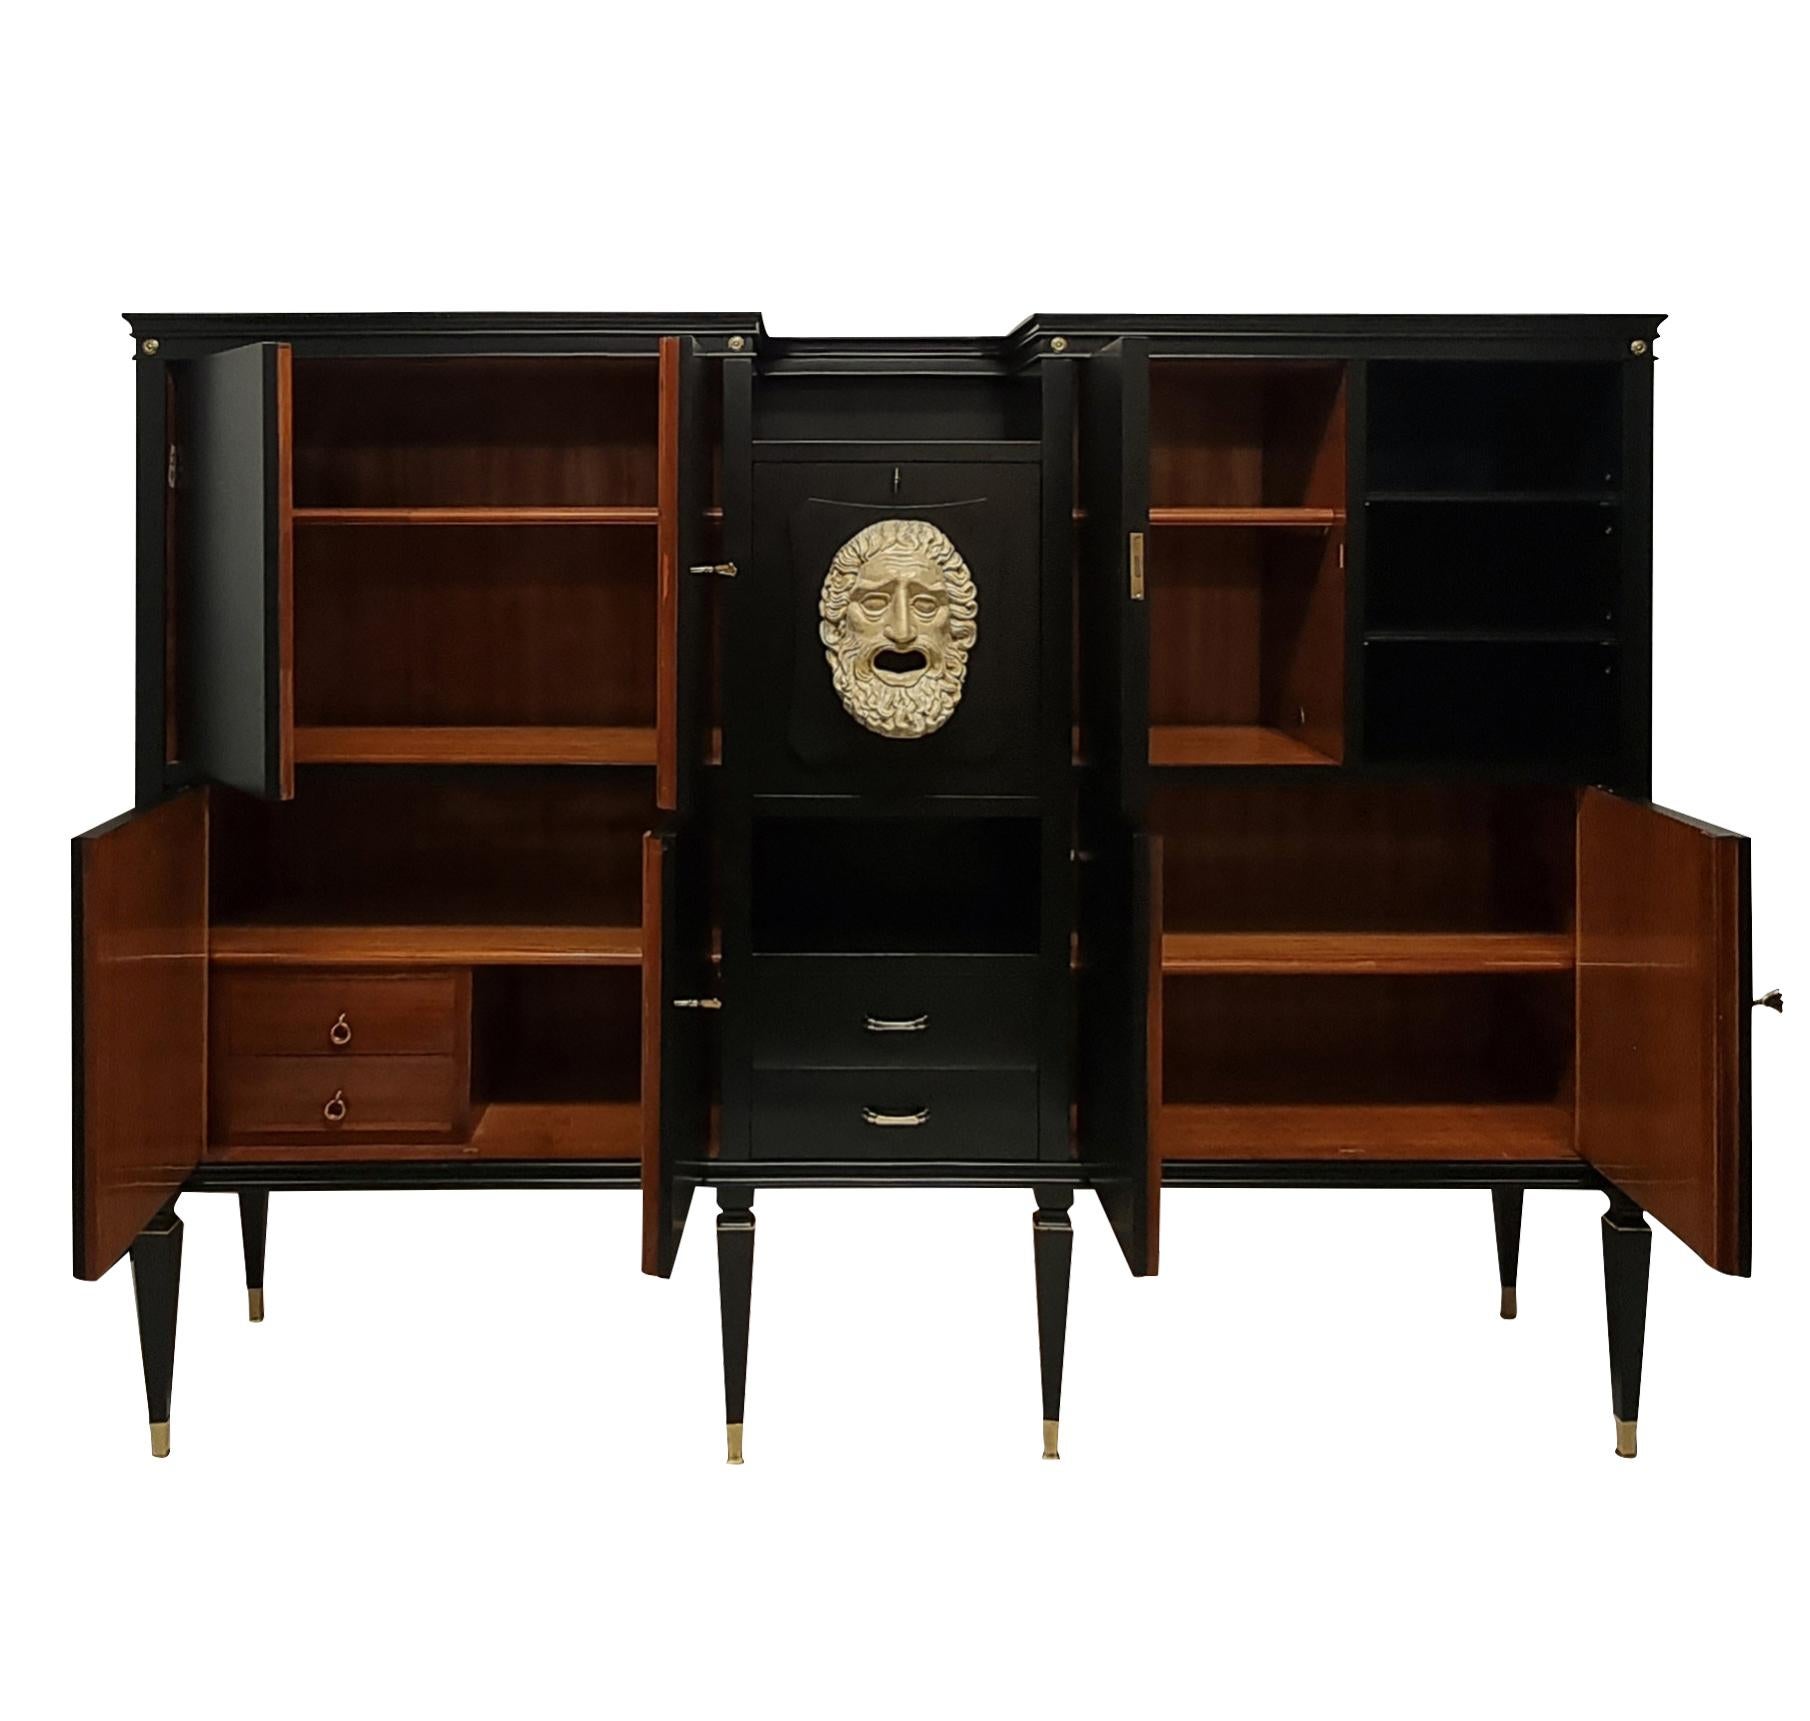 An Italian bar cabinet of monumental proportions by Paolo Buffa. In the neo-classical taste, it comprises four large cupboards, shelves and two drawers, each lined in sapele wood. The central bar cabinet is mirror lined with a fall front door and